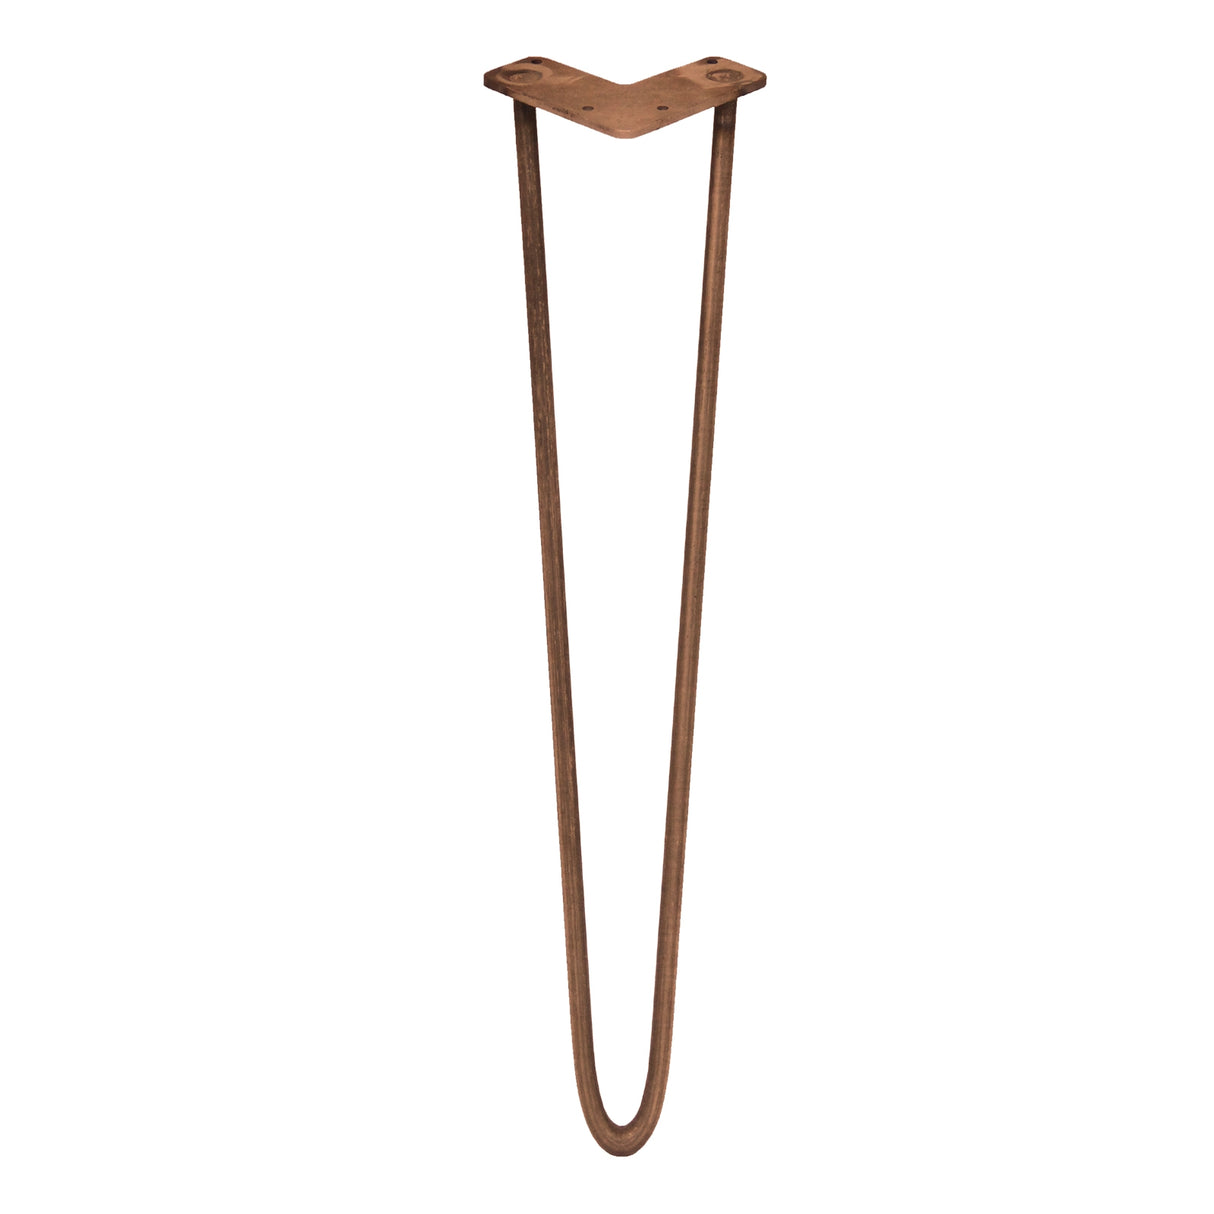 4 x 28" Hairpin Legs - 2 Prong - 12mm - Antique Copper